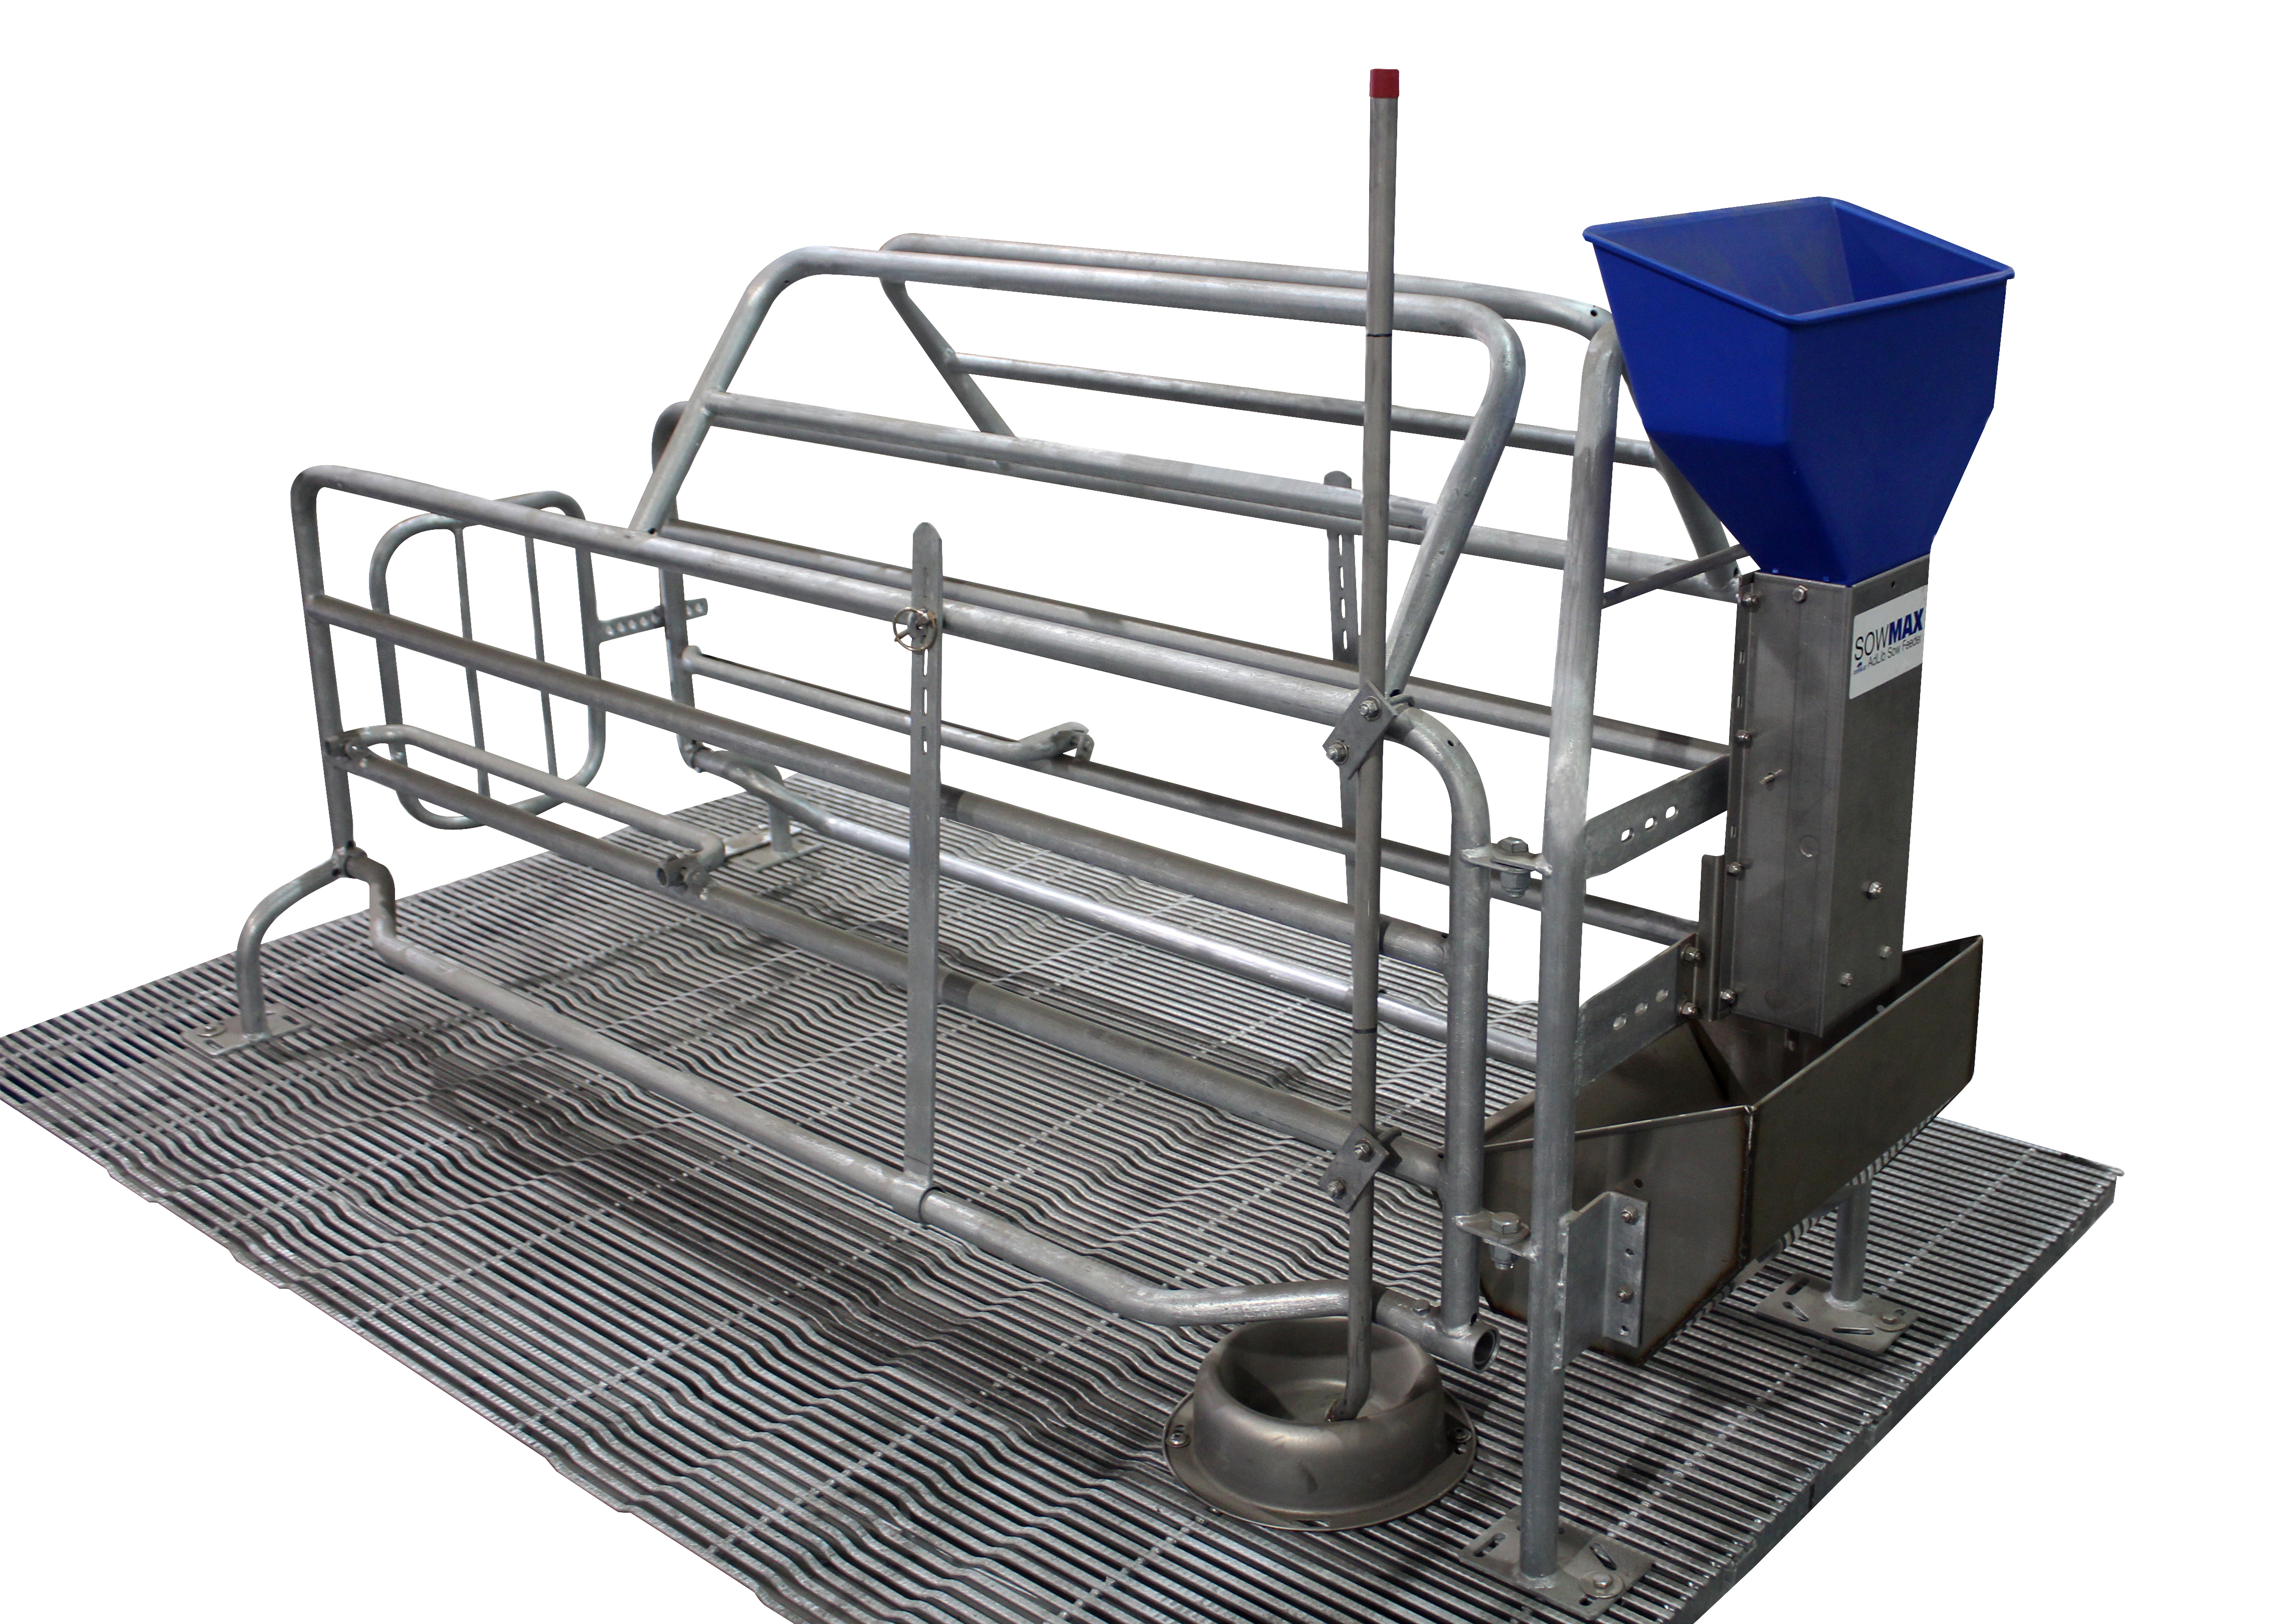 Hog Slat International farrowing crates are designed to comply with applicable animal welfare standards and built to meet the production needs of pork producers outside the United States.